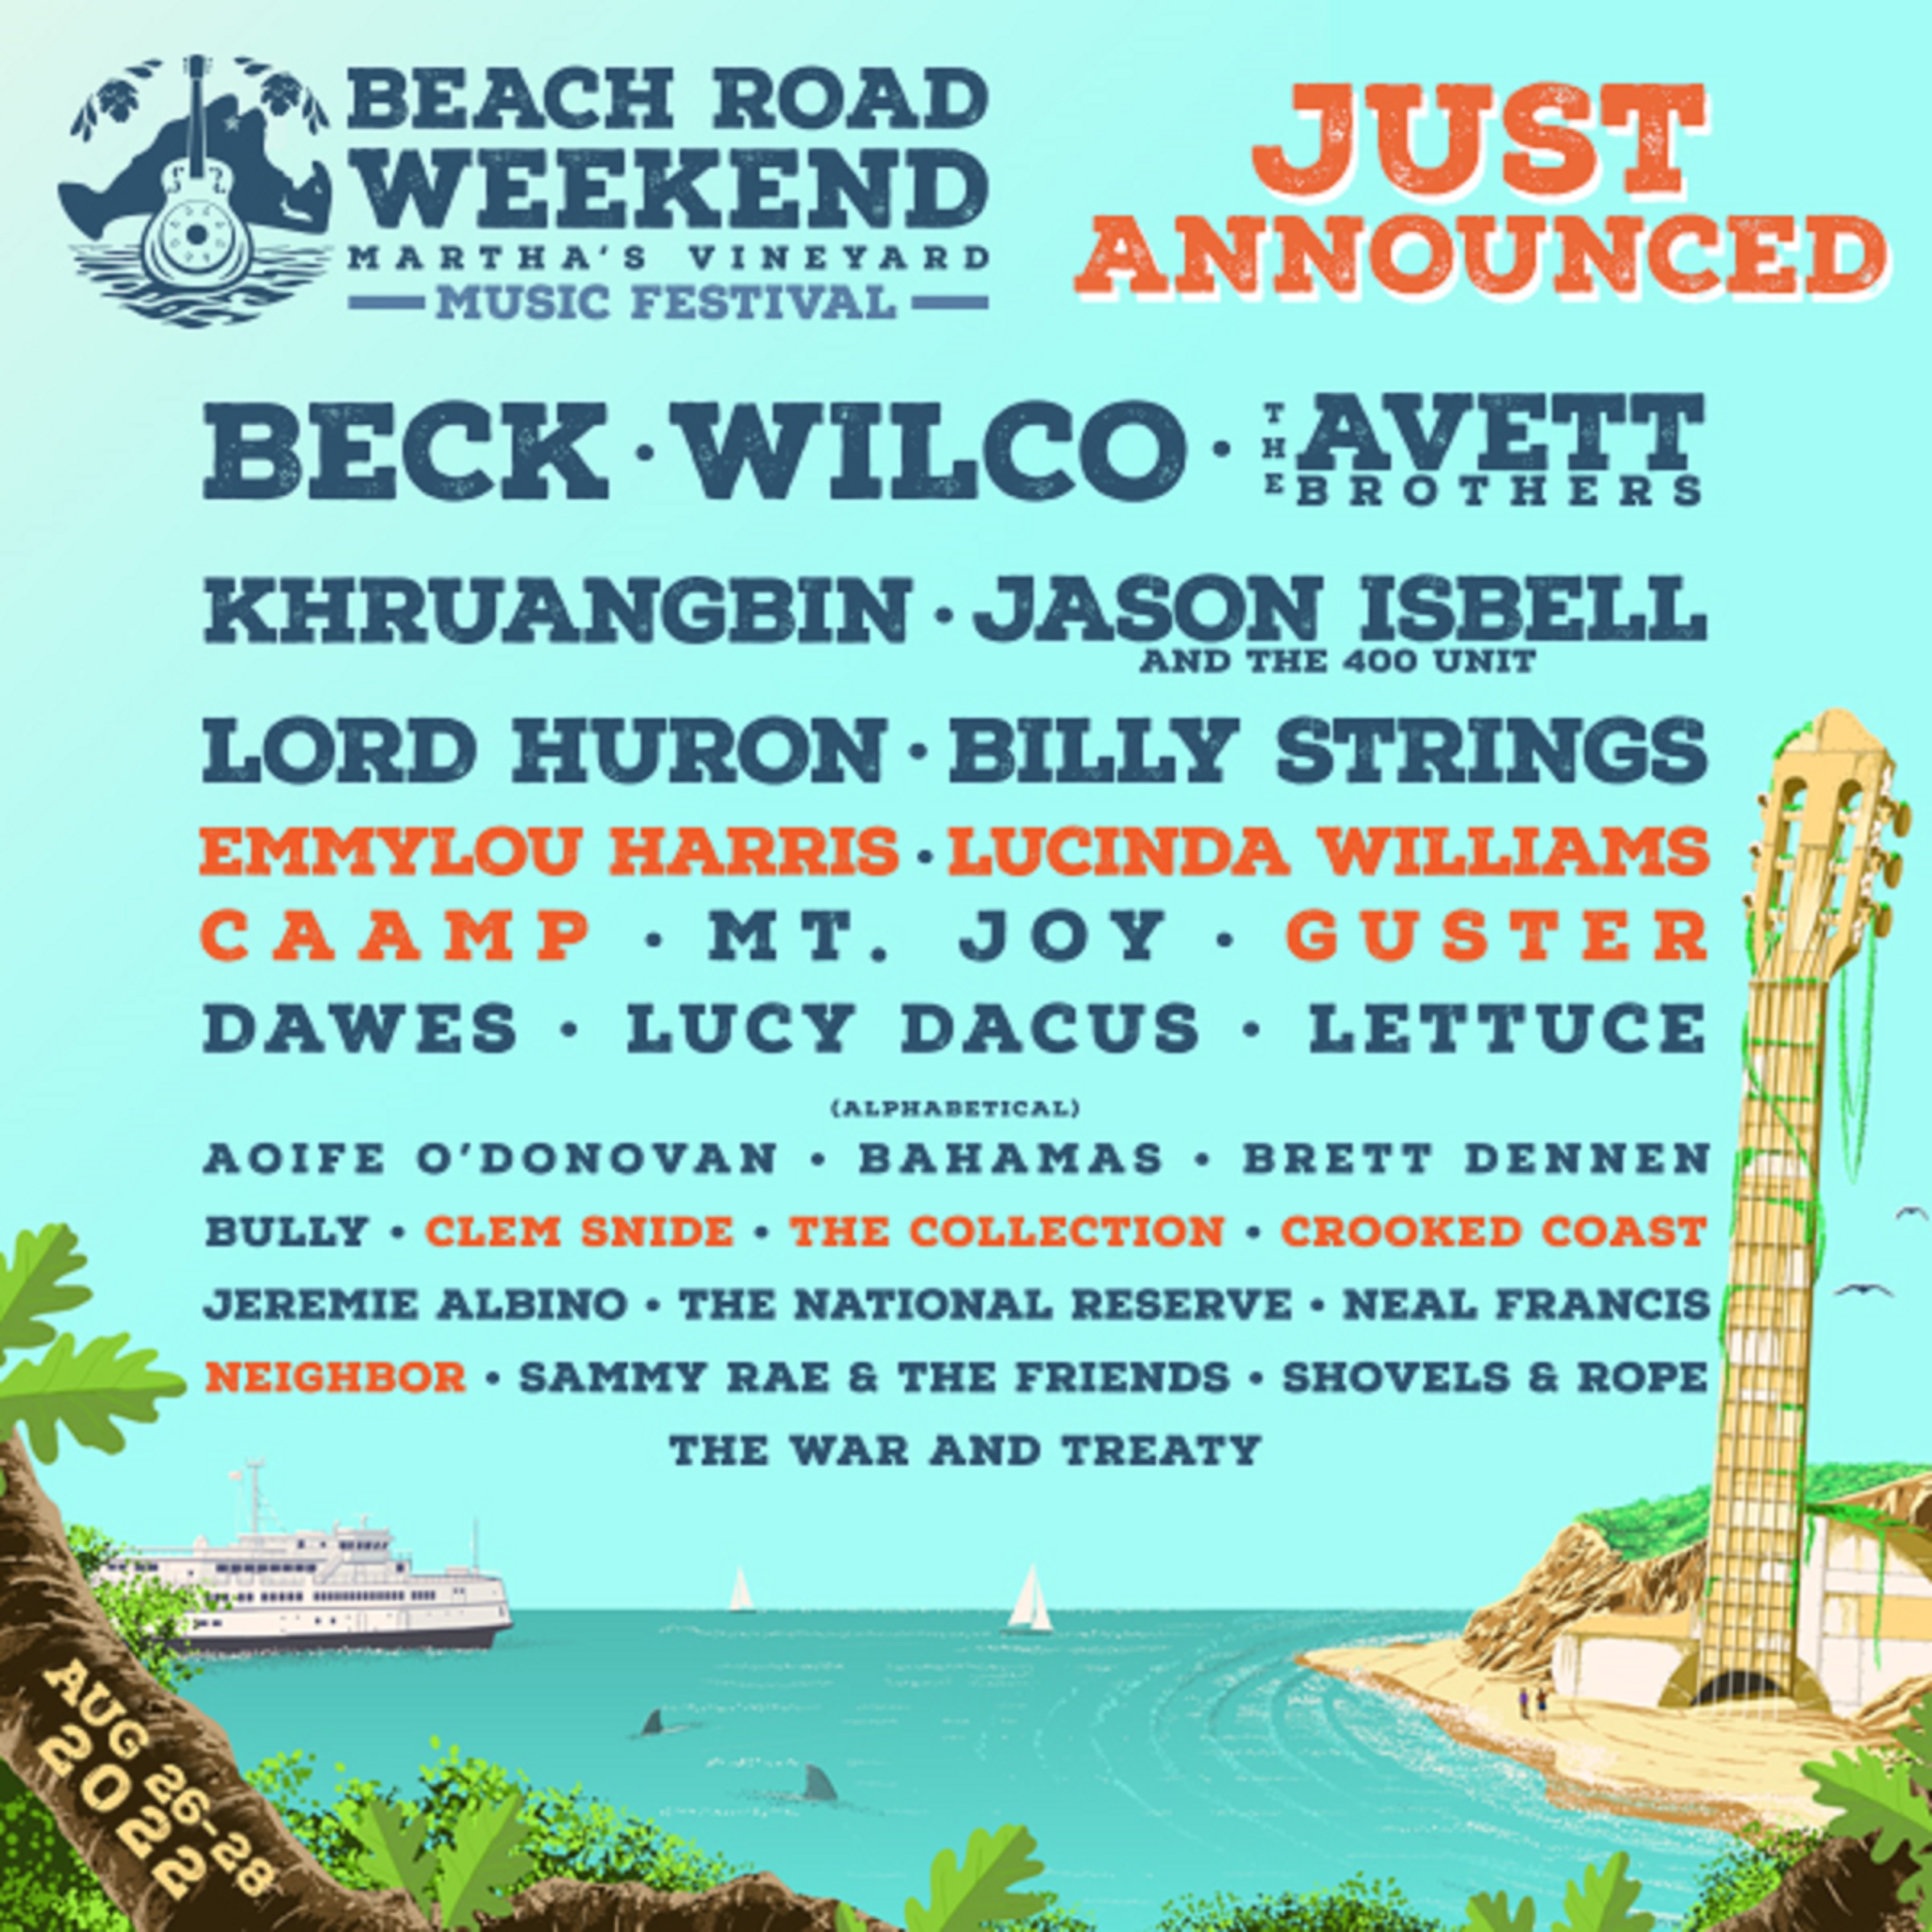 Emmylou Harris, Lucinda Williams, Caamp, Guster and more join the Beach Road Weekend 2022 Lineup